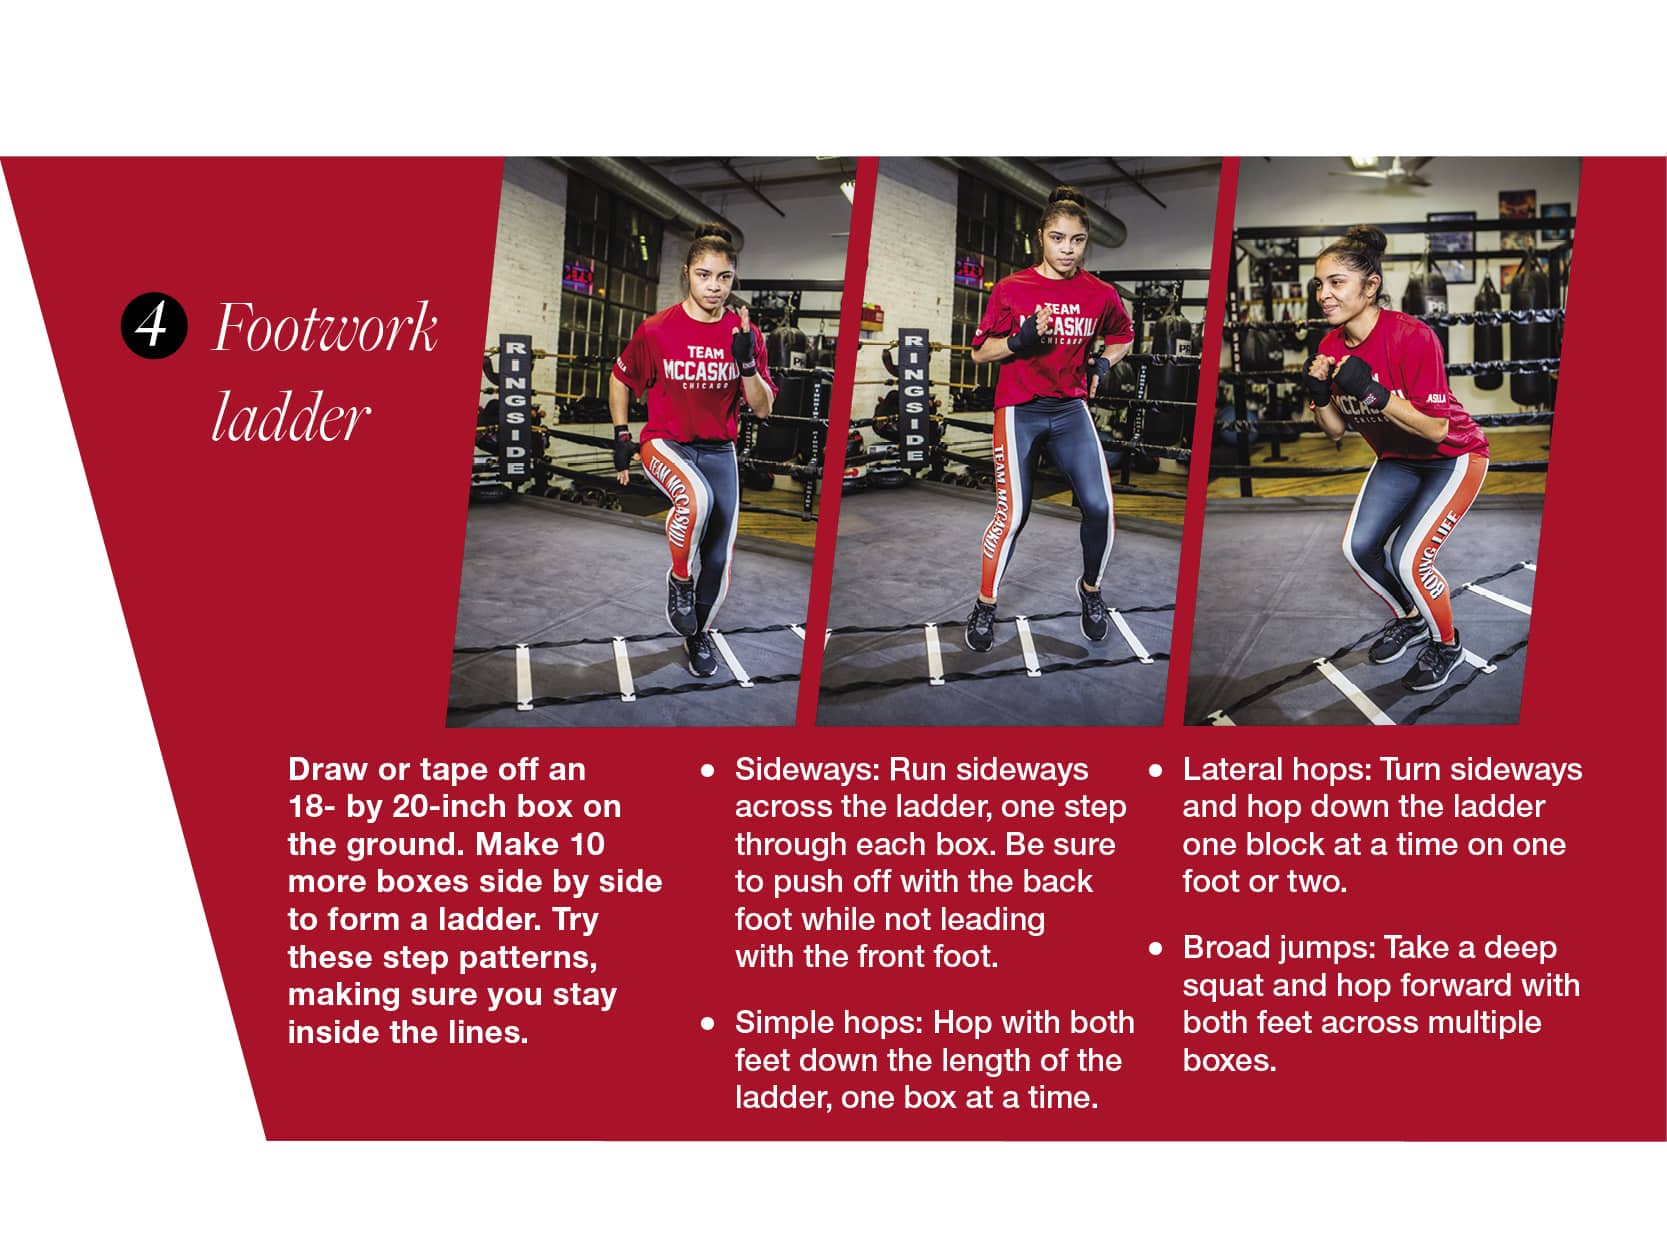 Boxing Fitness footwork ladder